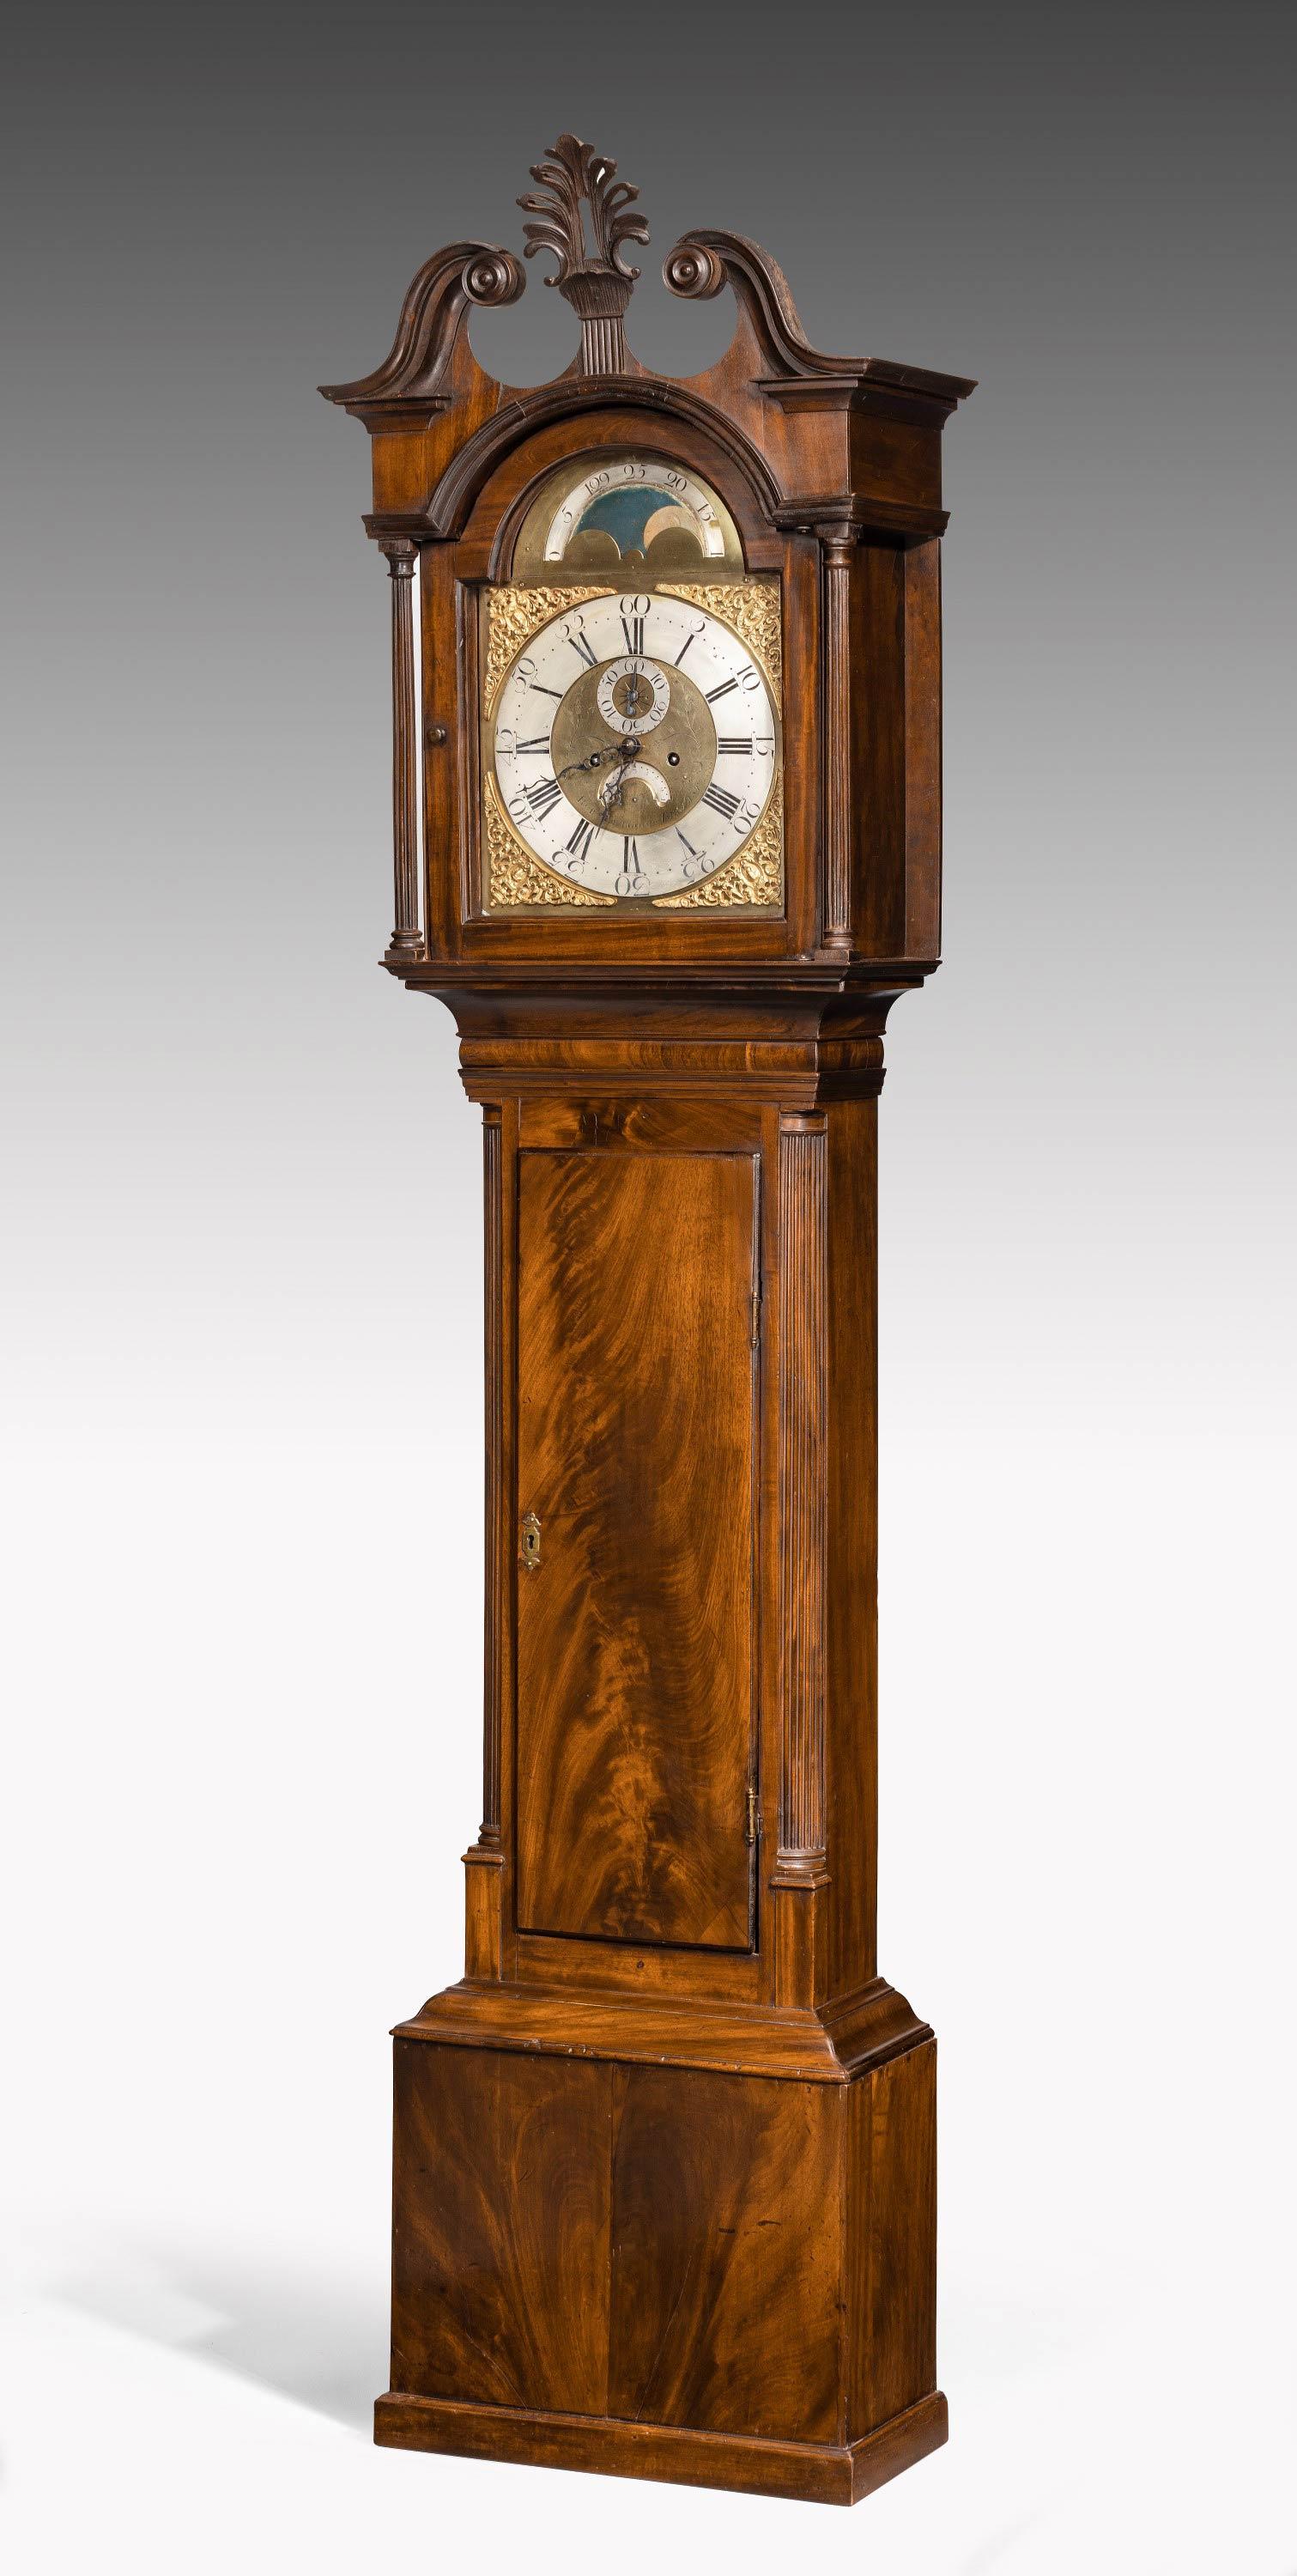 An Irish George III period mahogany longcase clock. Signed Robert Getwood of Belfast. Of quite a compact size. With an eight-day, four pillar bell striking movement with an anchor escapement.
 